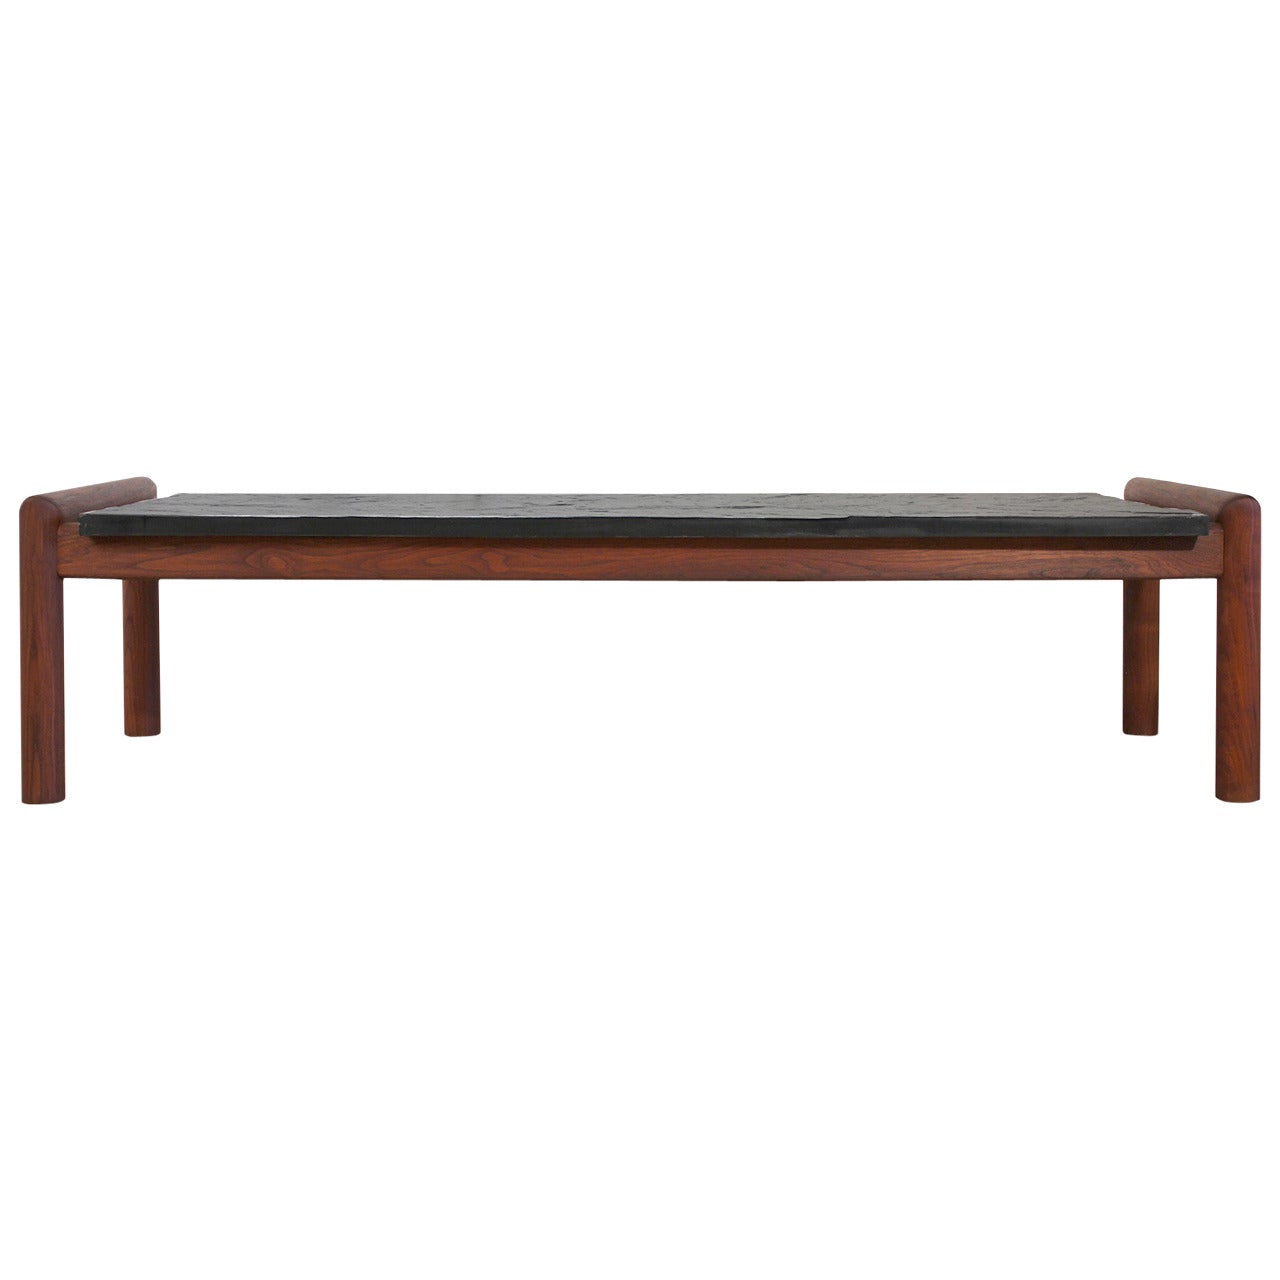 Adrian Pearsall for Craft Associates Slate Top Coffee Table